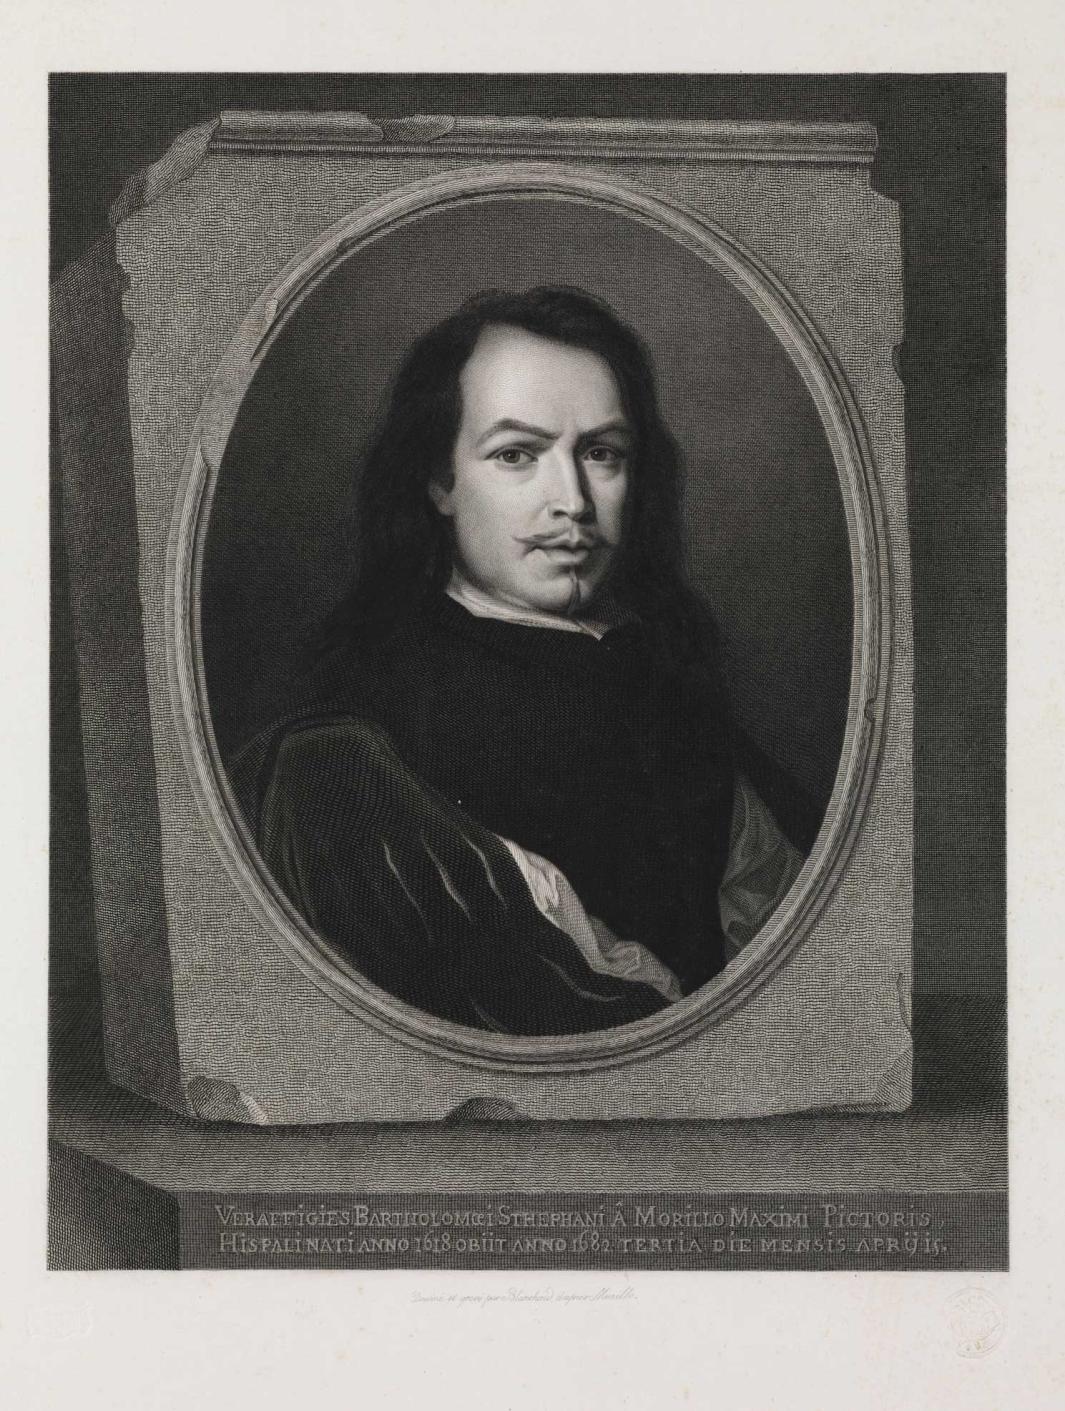 etching and engraving on paper of man with mustache and and long hair in oval frame